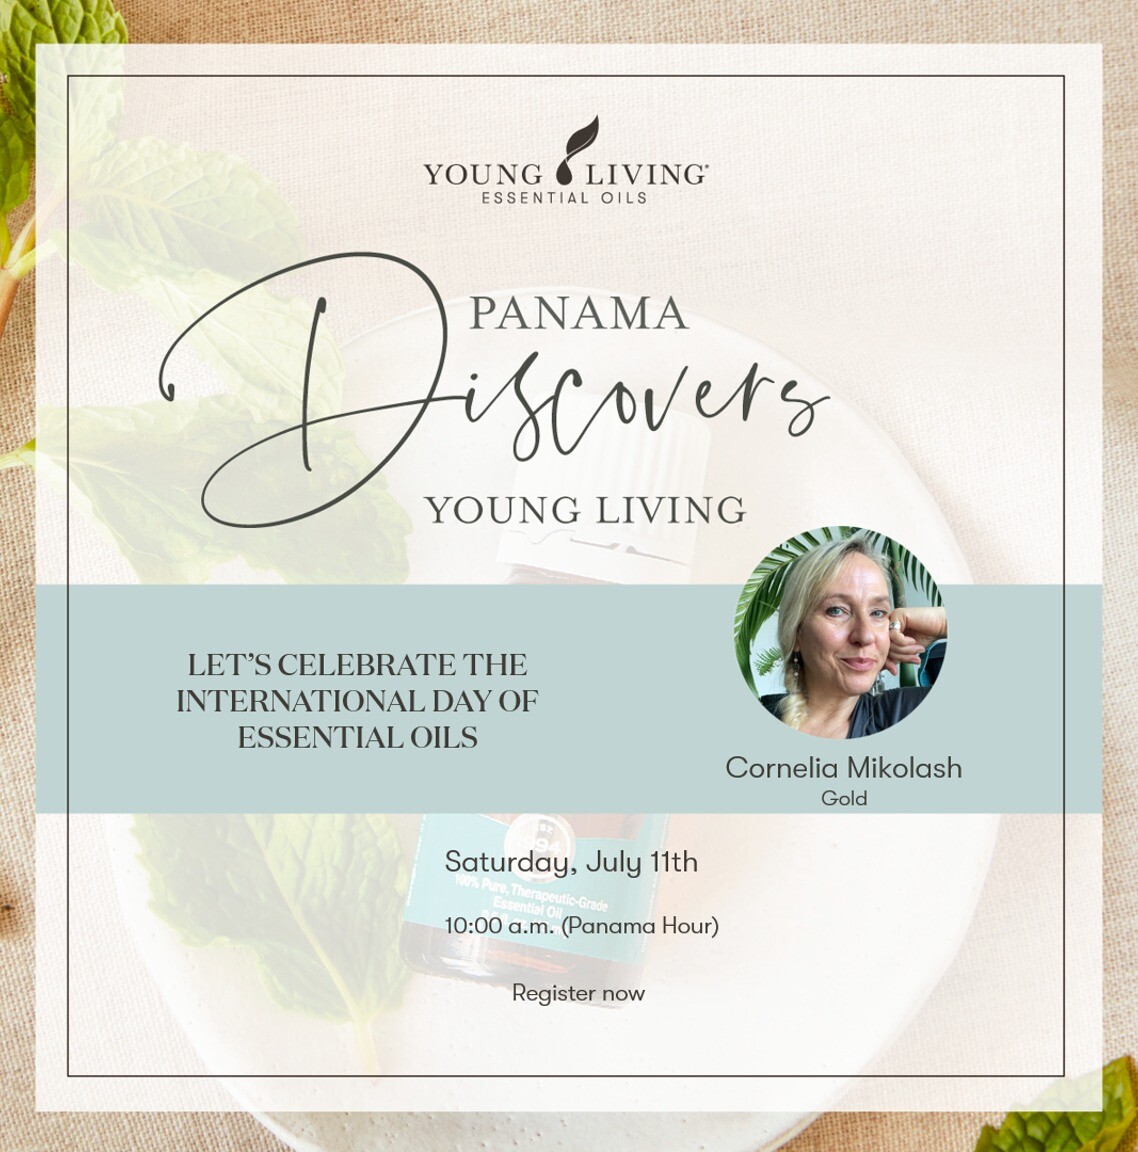 Panama Discovers Young Living